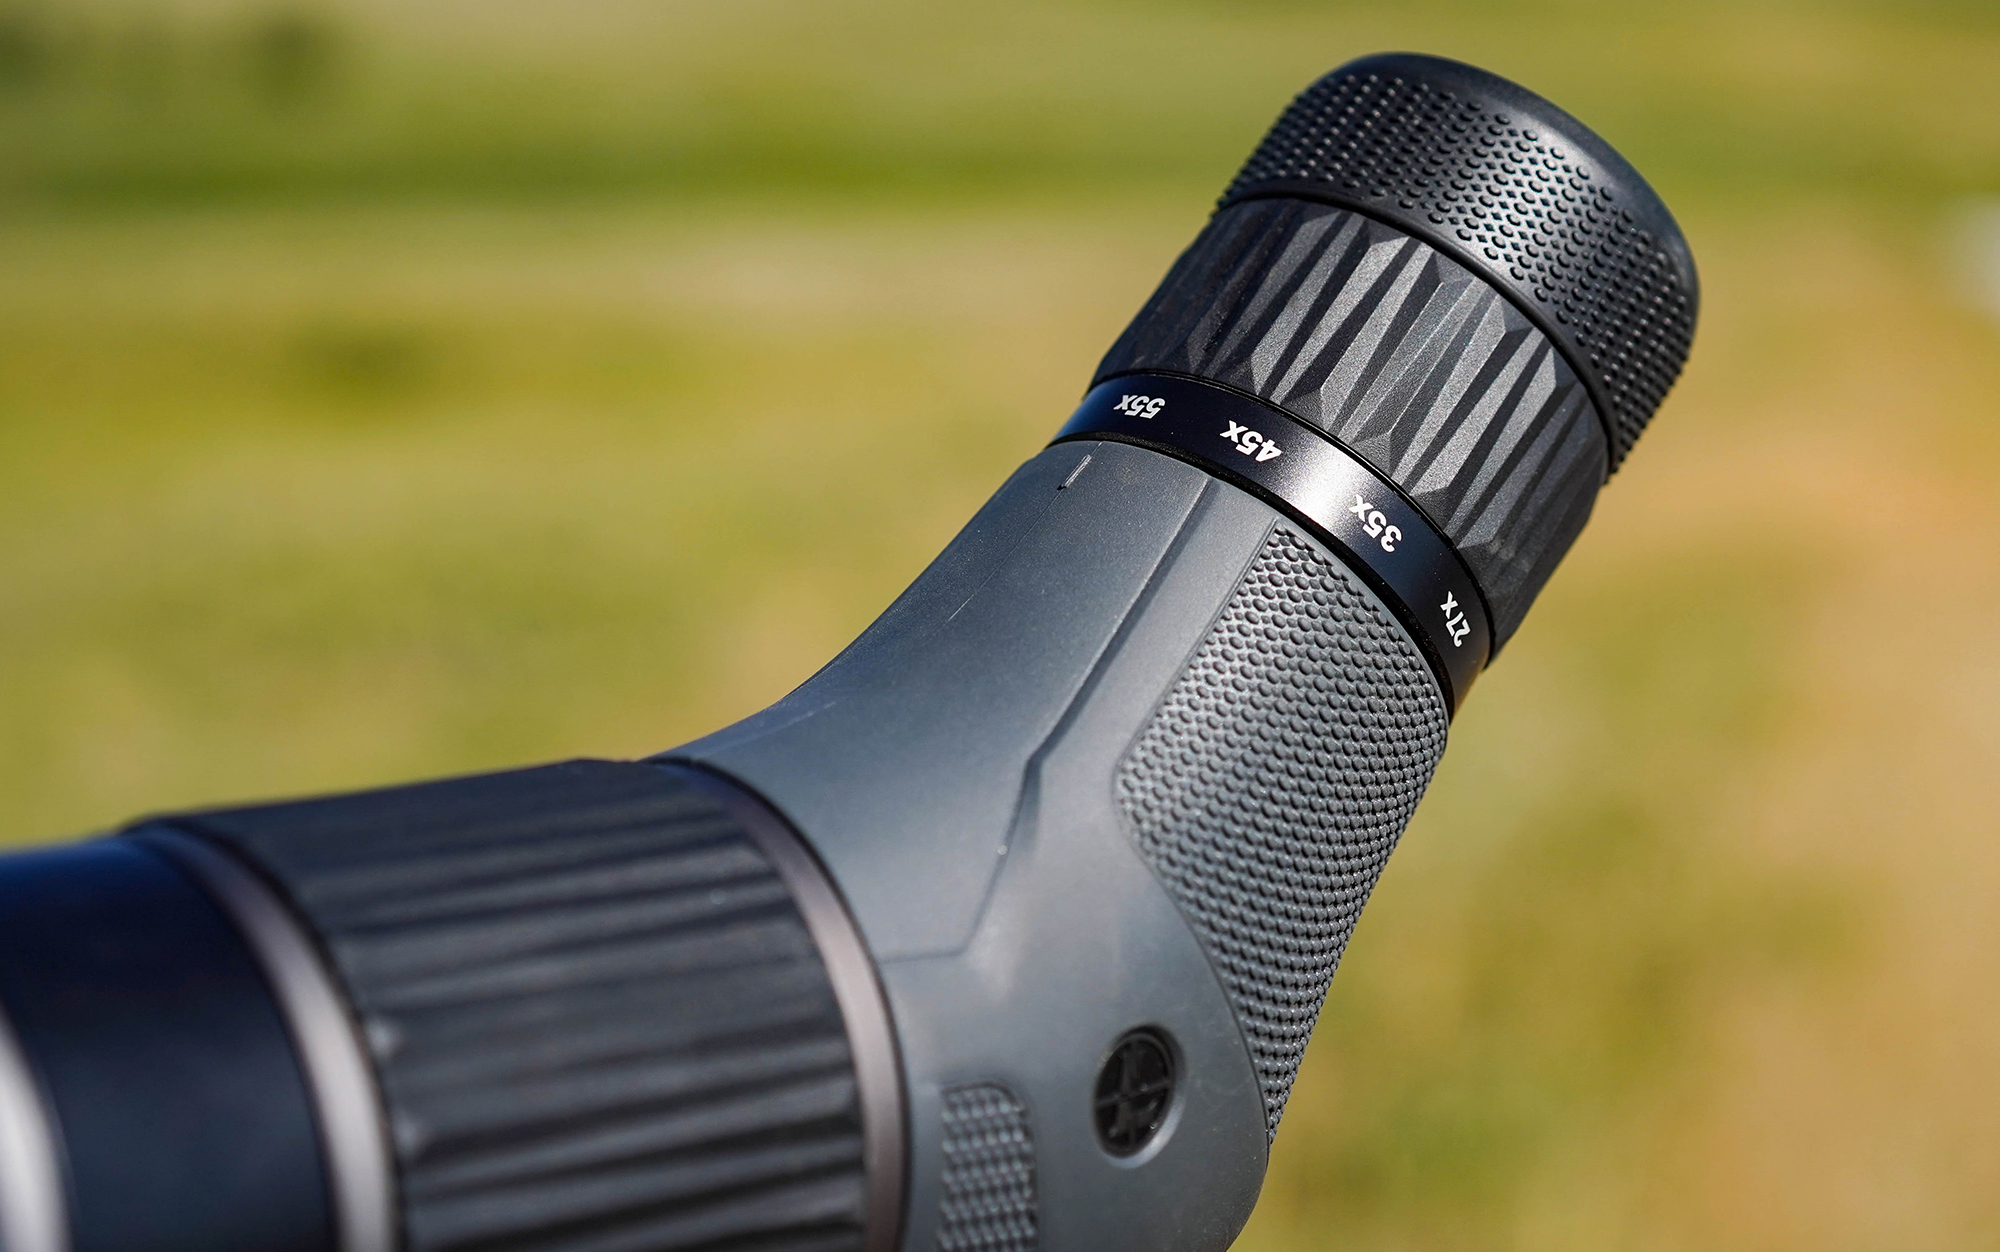 The Leupold spotting scope has aggressively textured controls.